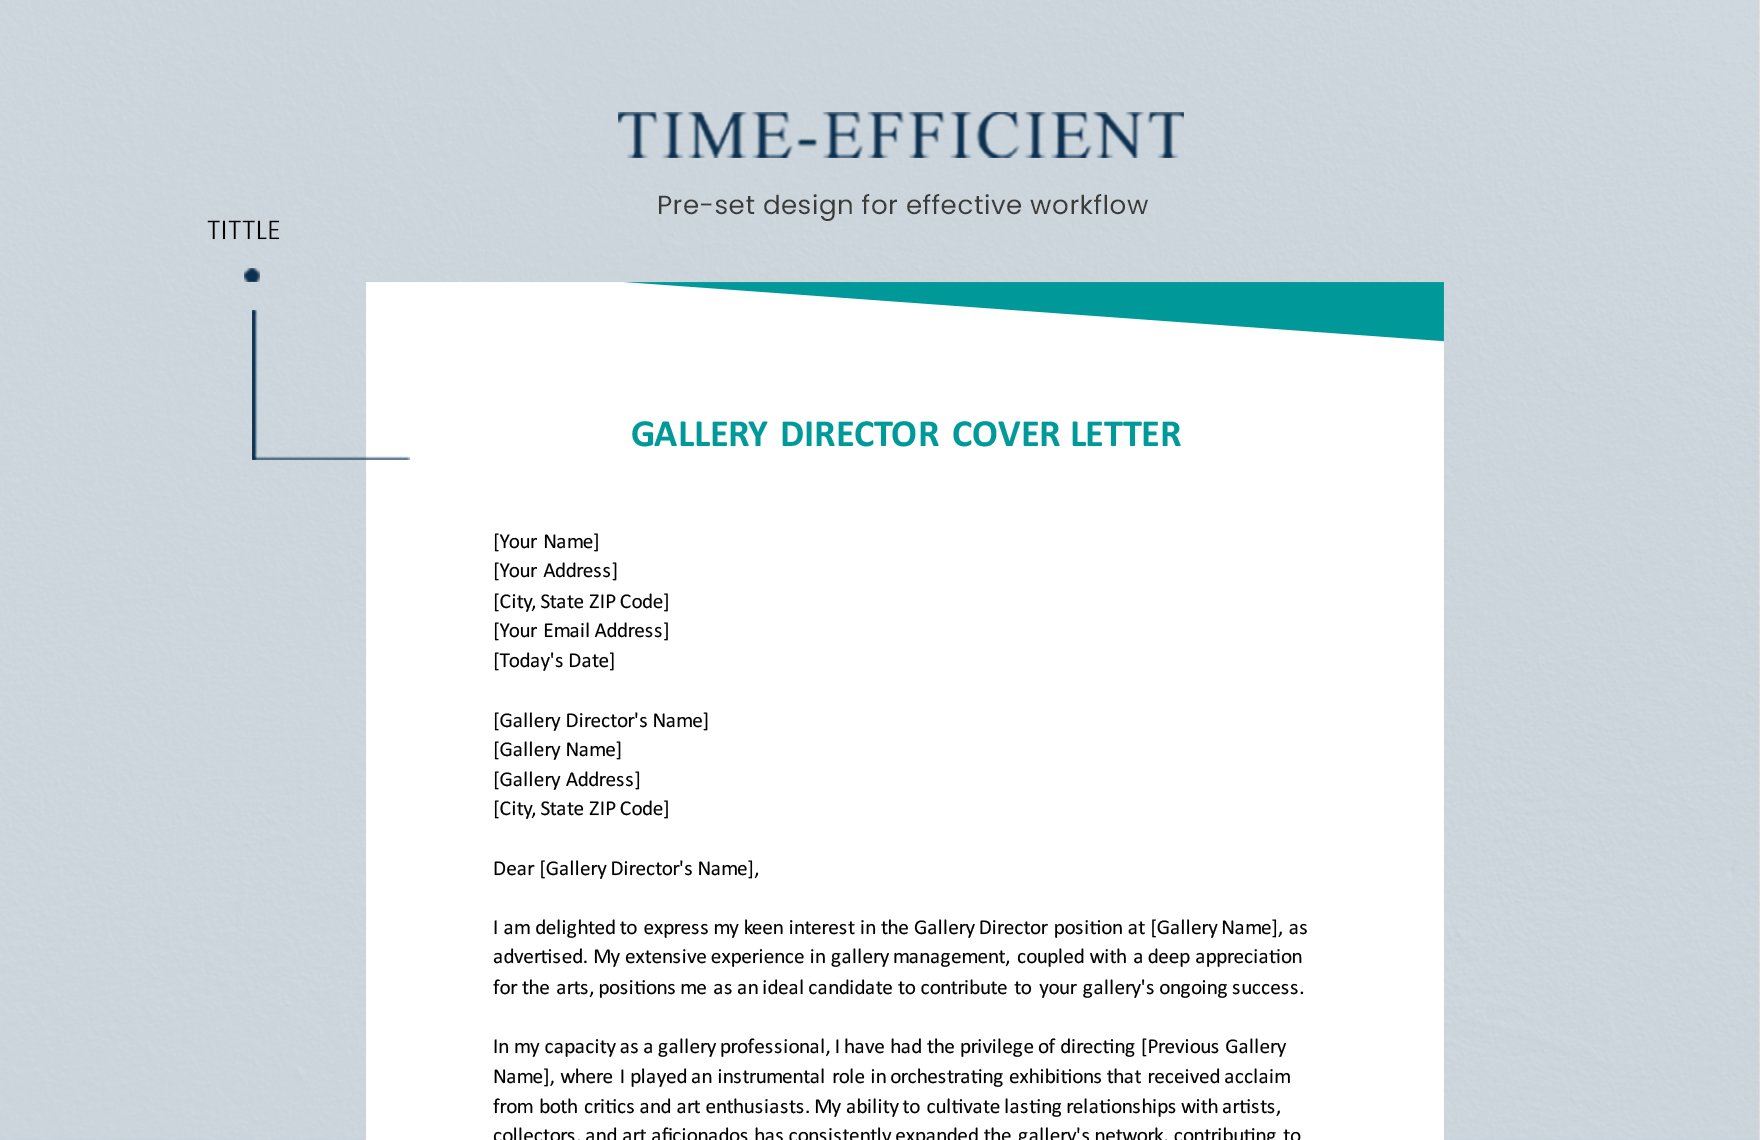 Gallery Director Cover Letter